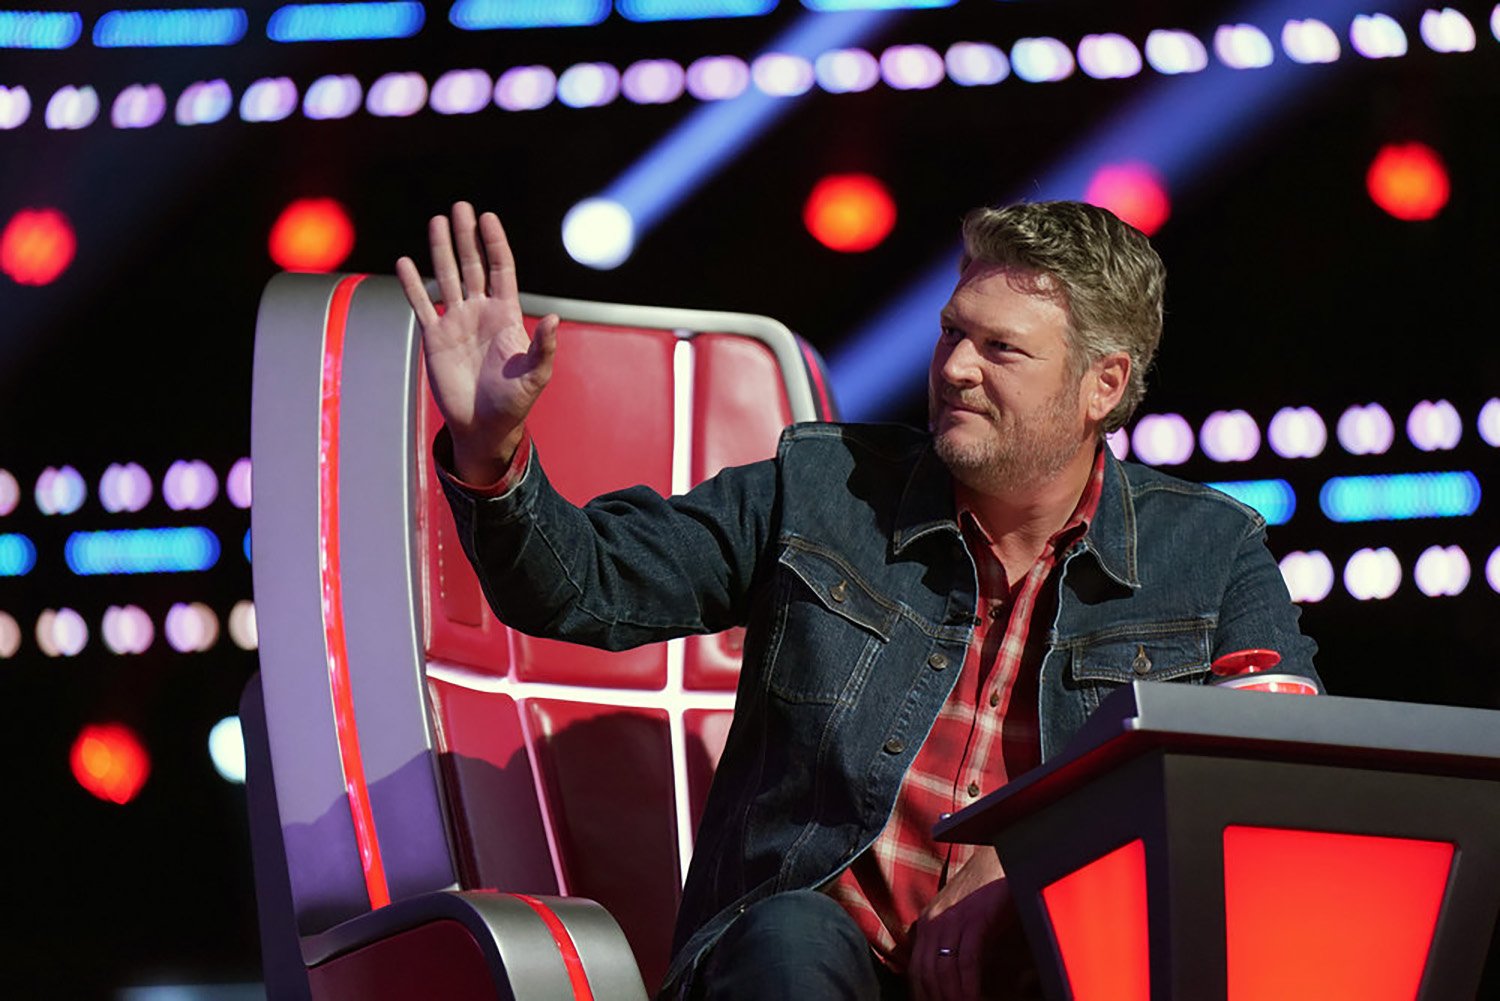 Blake Shelton waves from his chair on The Voice Season 22 after he announces he's leaving